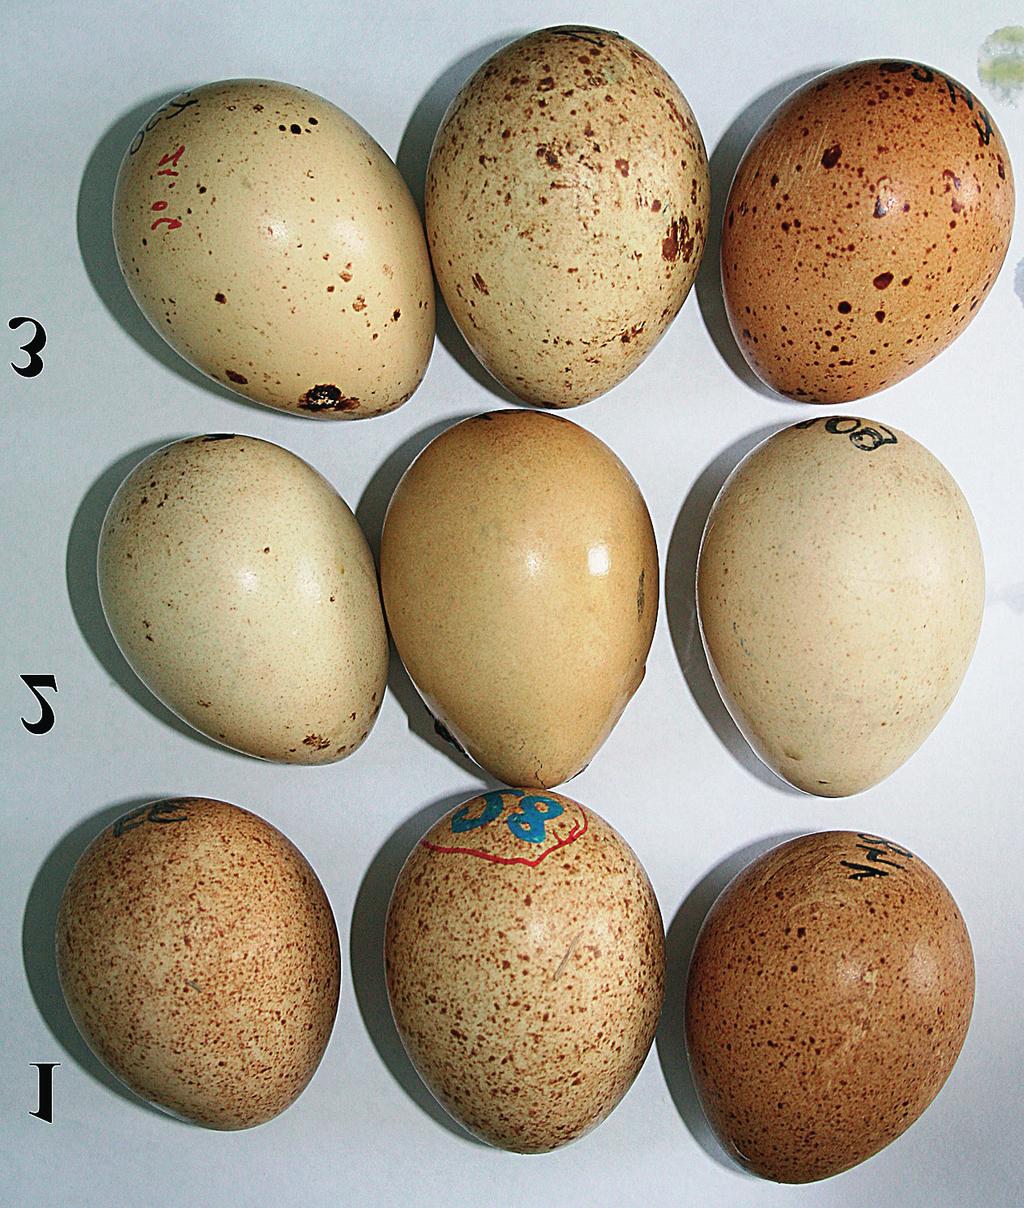 Rosenberger et al.: Capercaillie eggshell pigmentation, maculation and thickness 163 Fig. 1. Types of maculation of Capercaillie eggshells: 1 mottled, 2 smooth, 3 spotted.